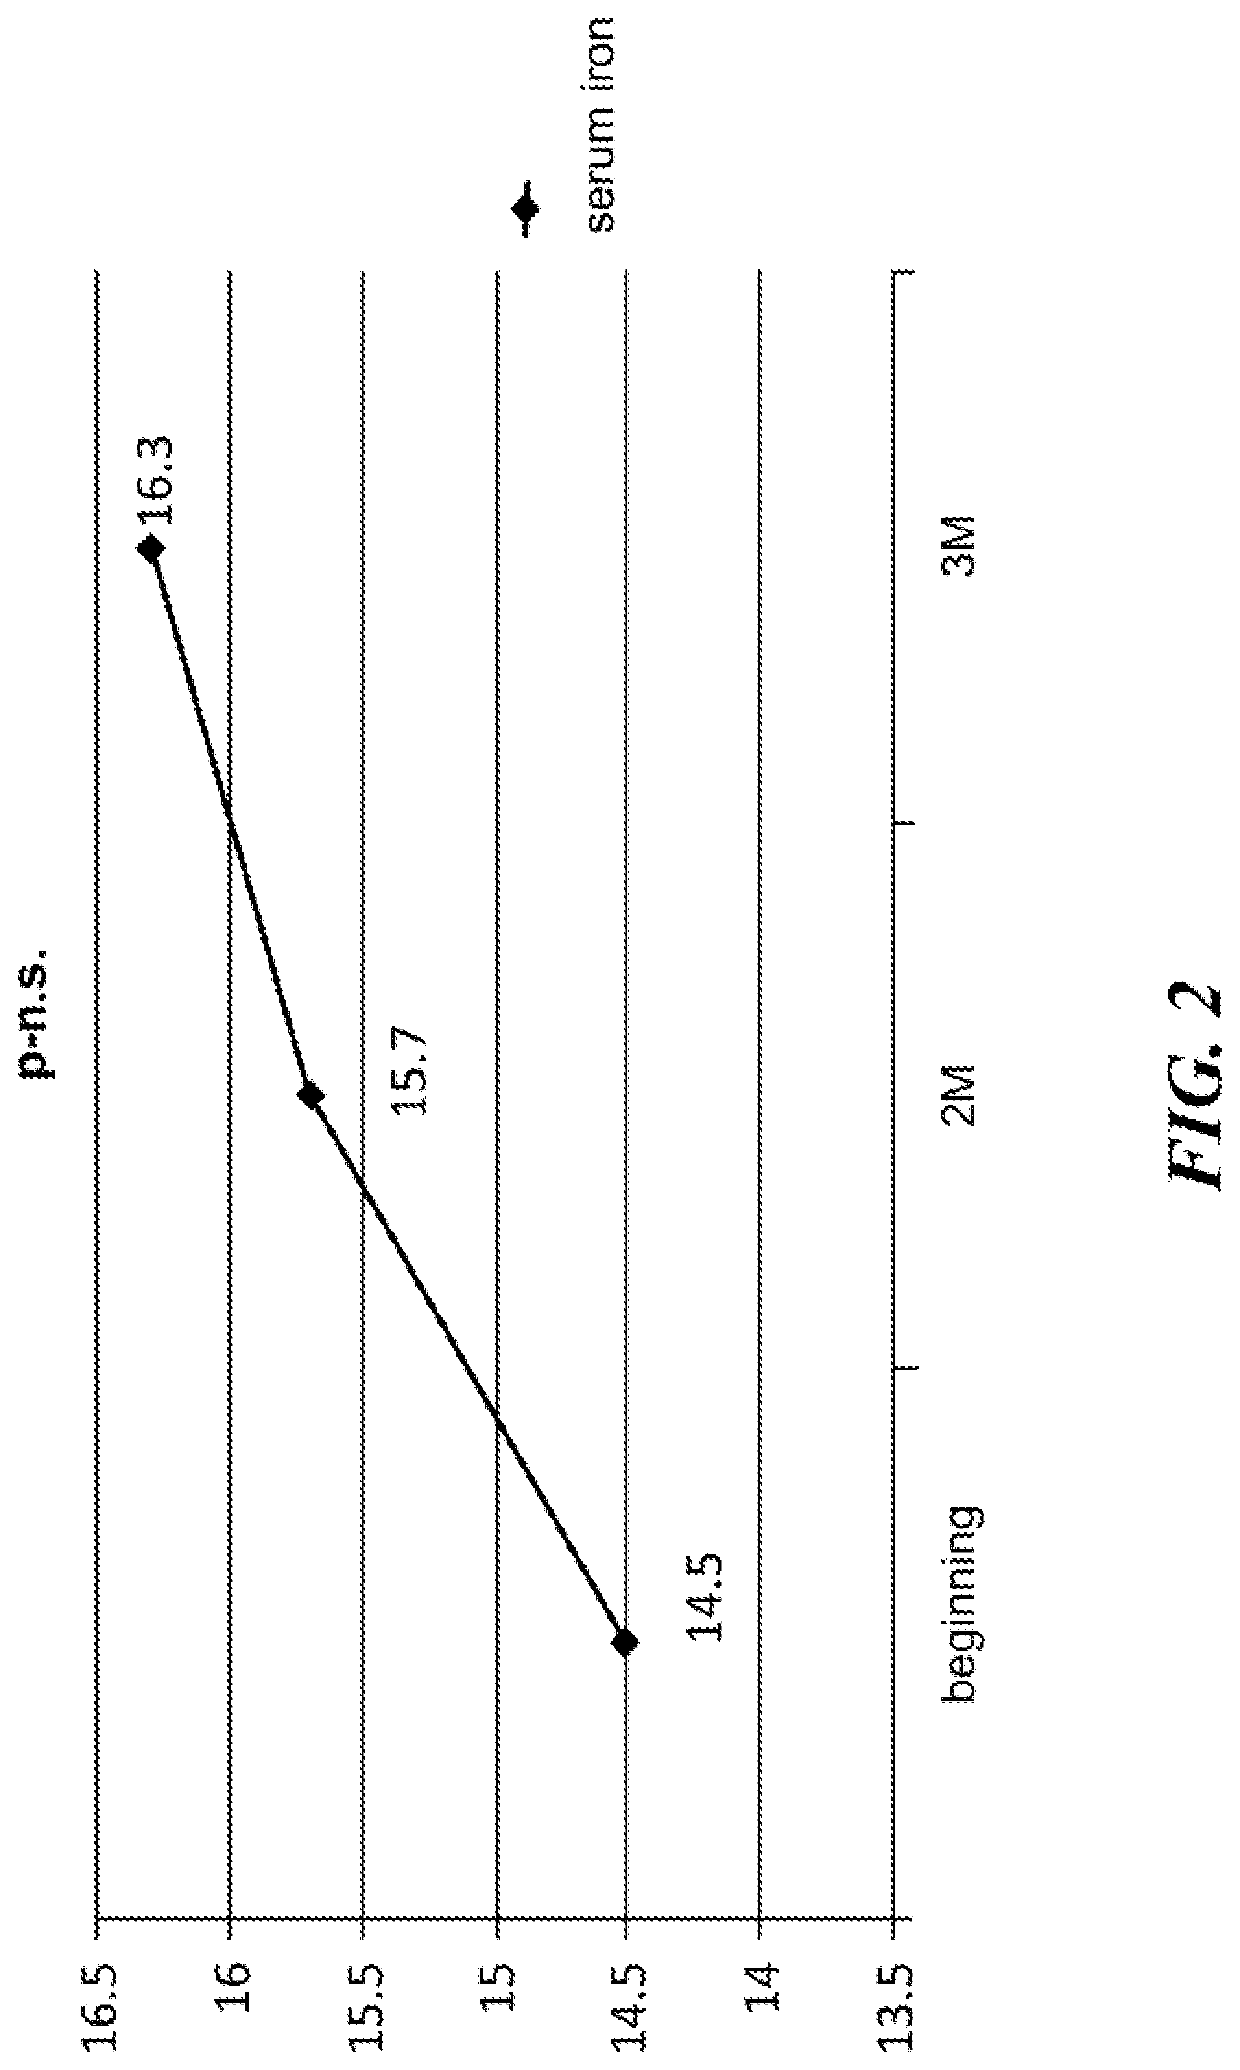 Natural combination products and methods for regulation of kidney and excretory system function